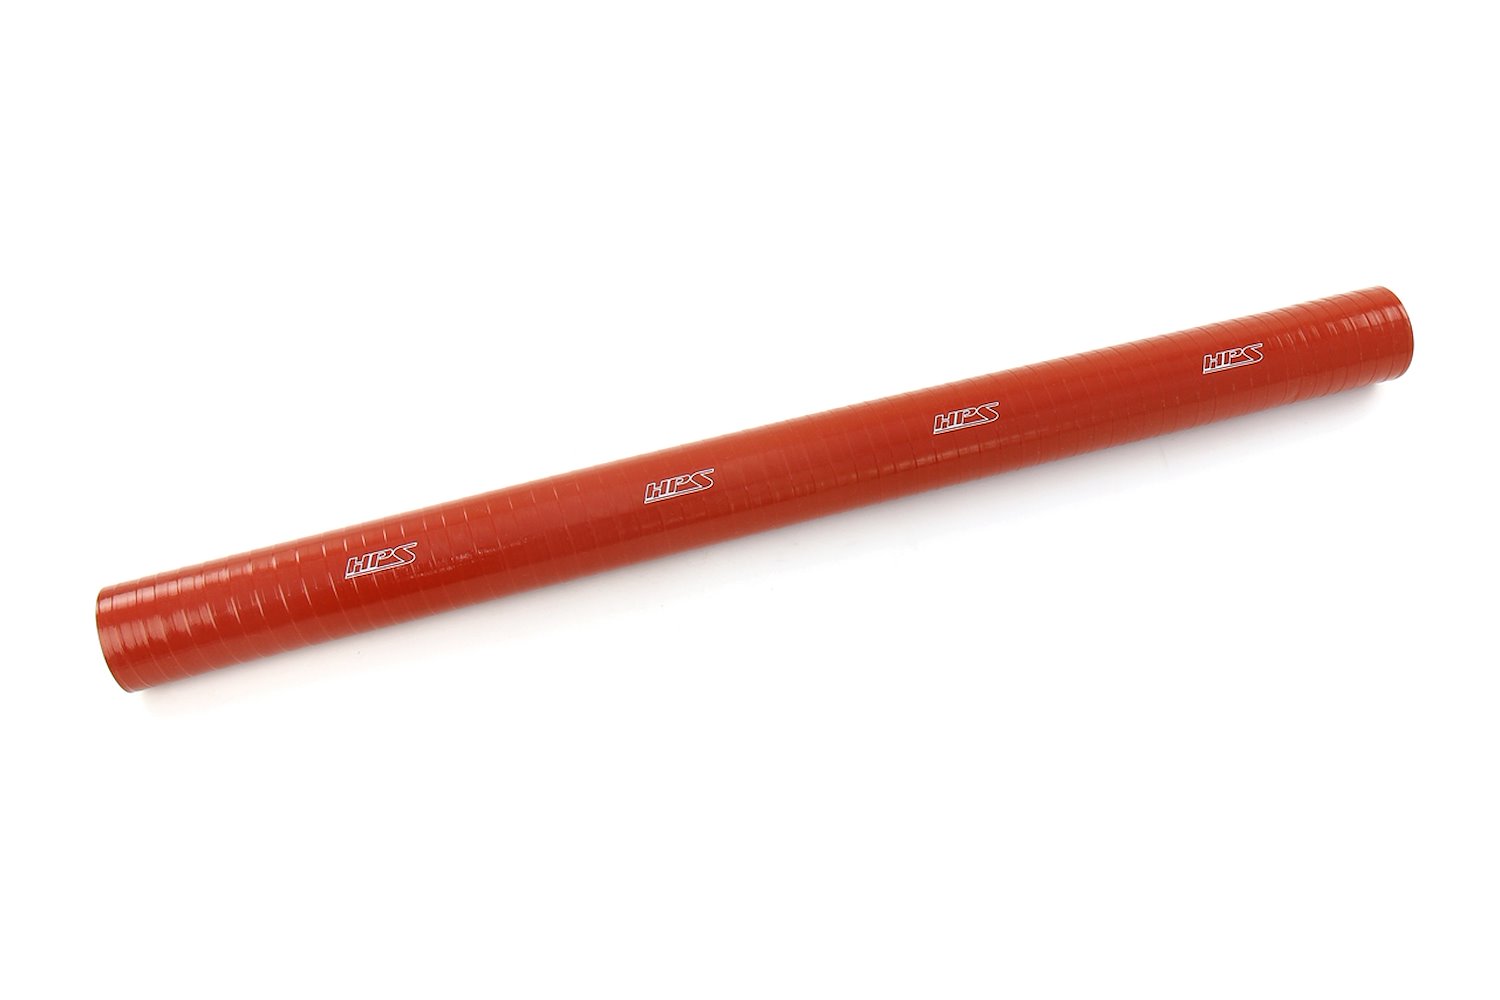 ST-3F-100-HOT Silicone Coolant Tube, Ultra High-Temp 4-Ply Reinforced, 1 in. ID, 3 ft. Long